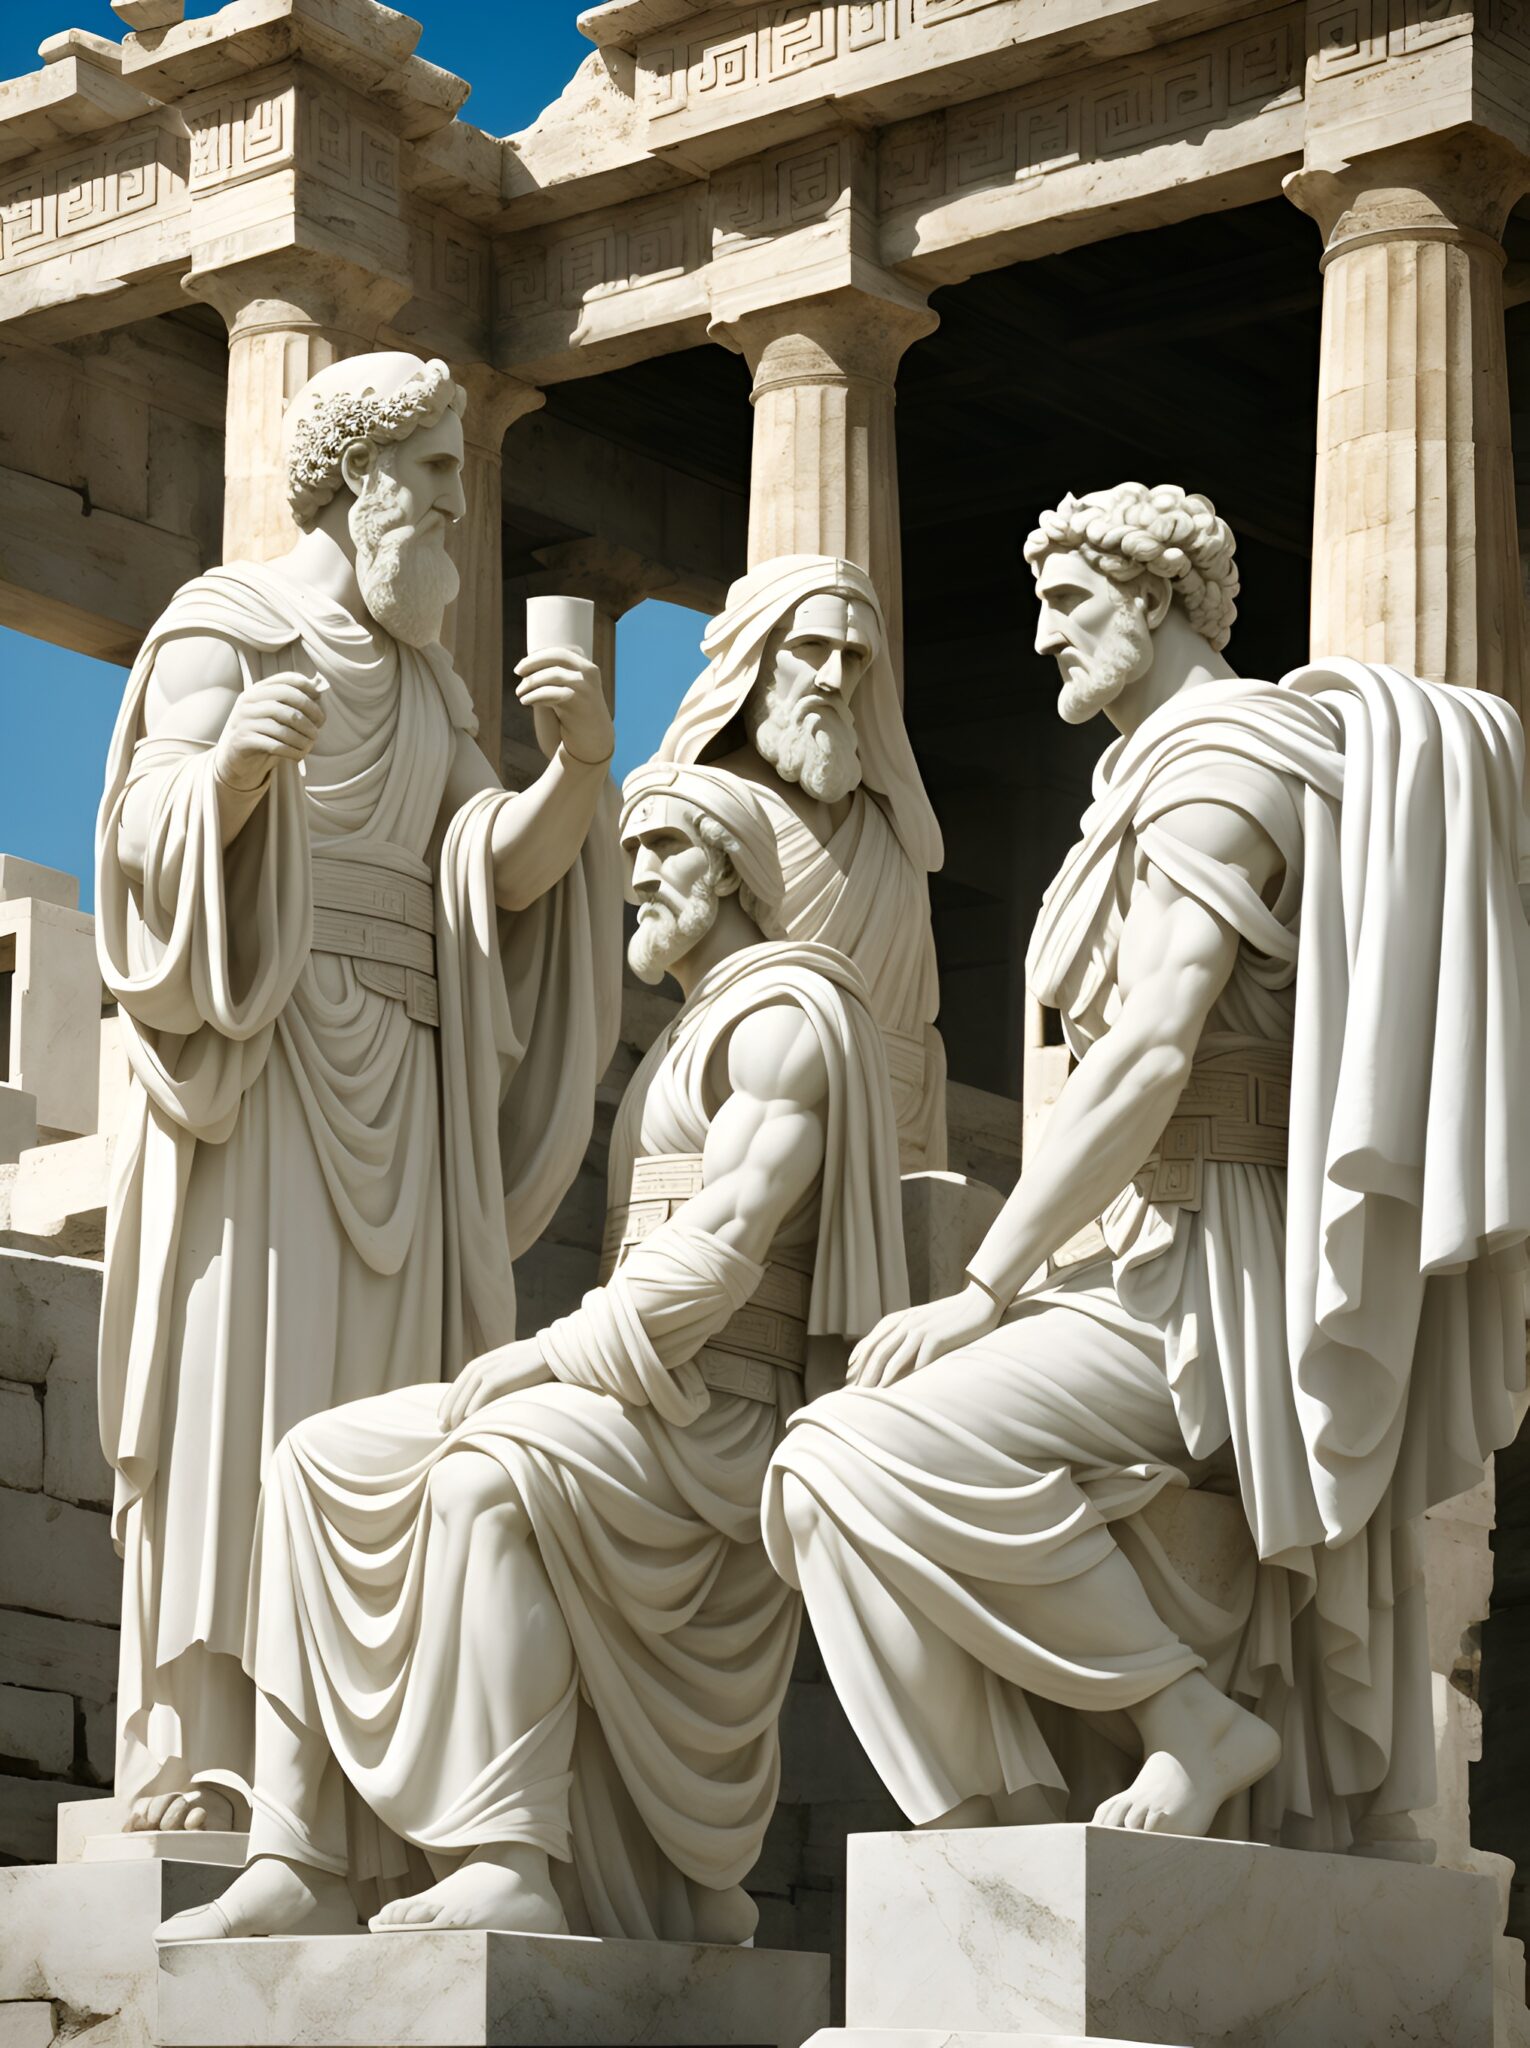 Who was the most intelligent philosopher of the Ancient Greek world?